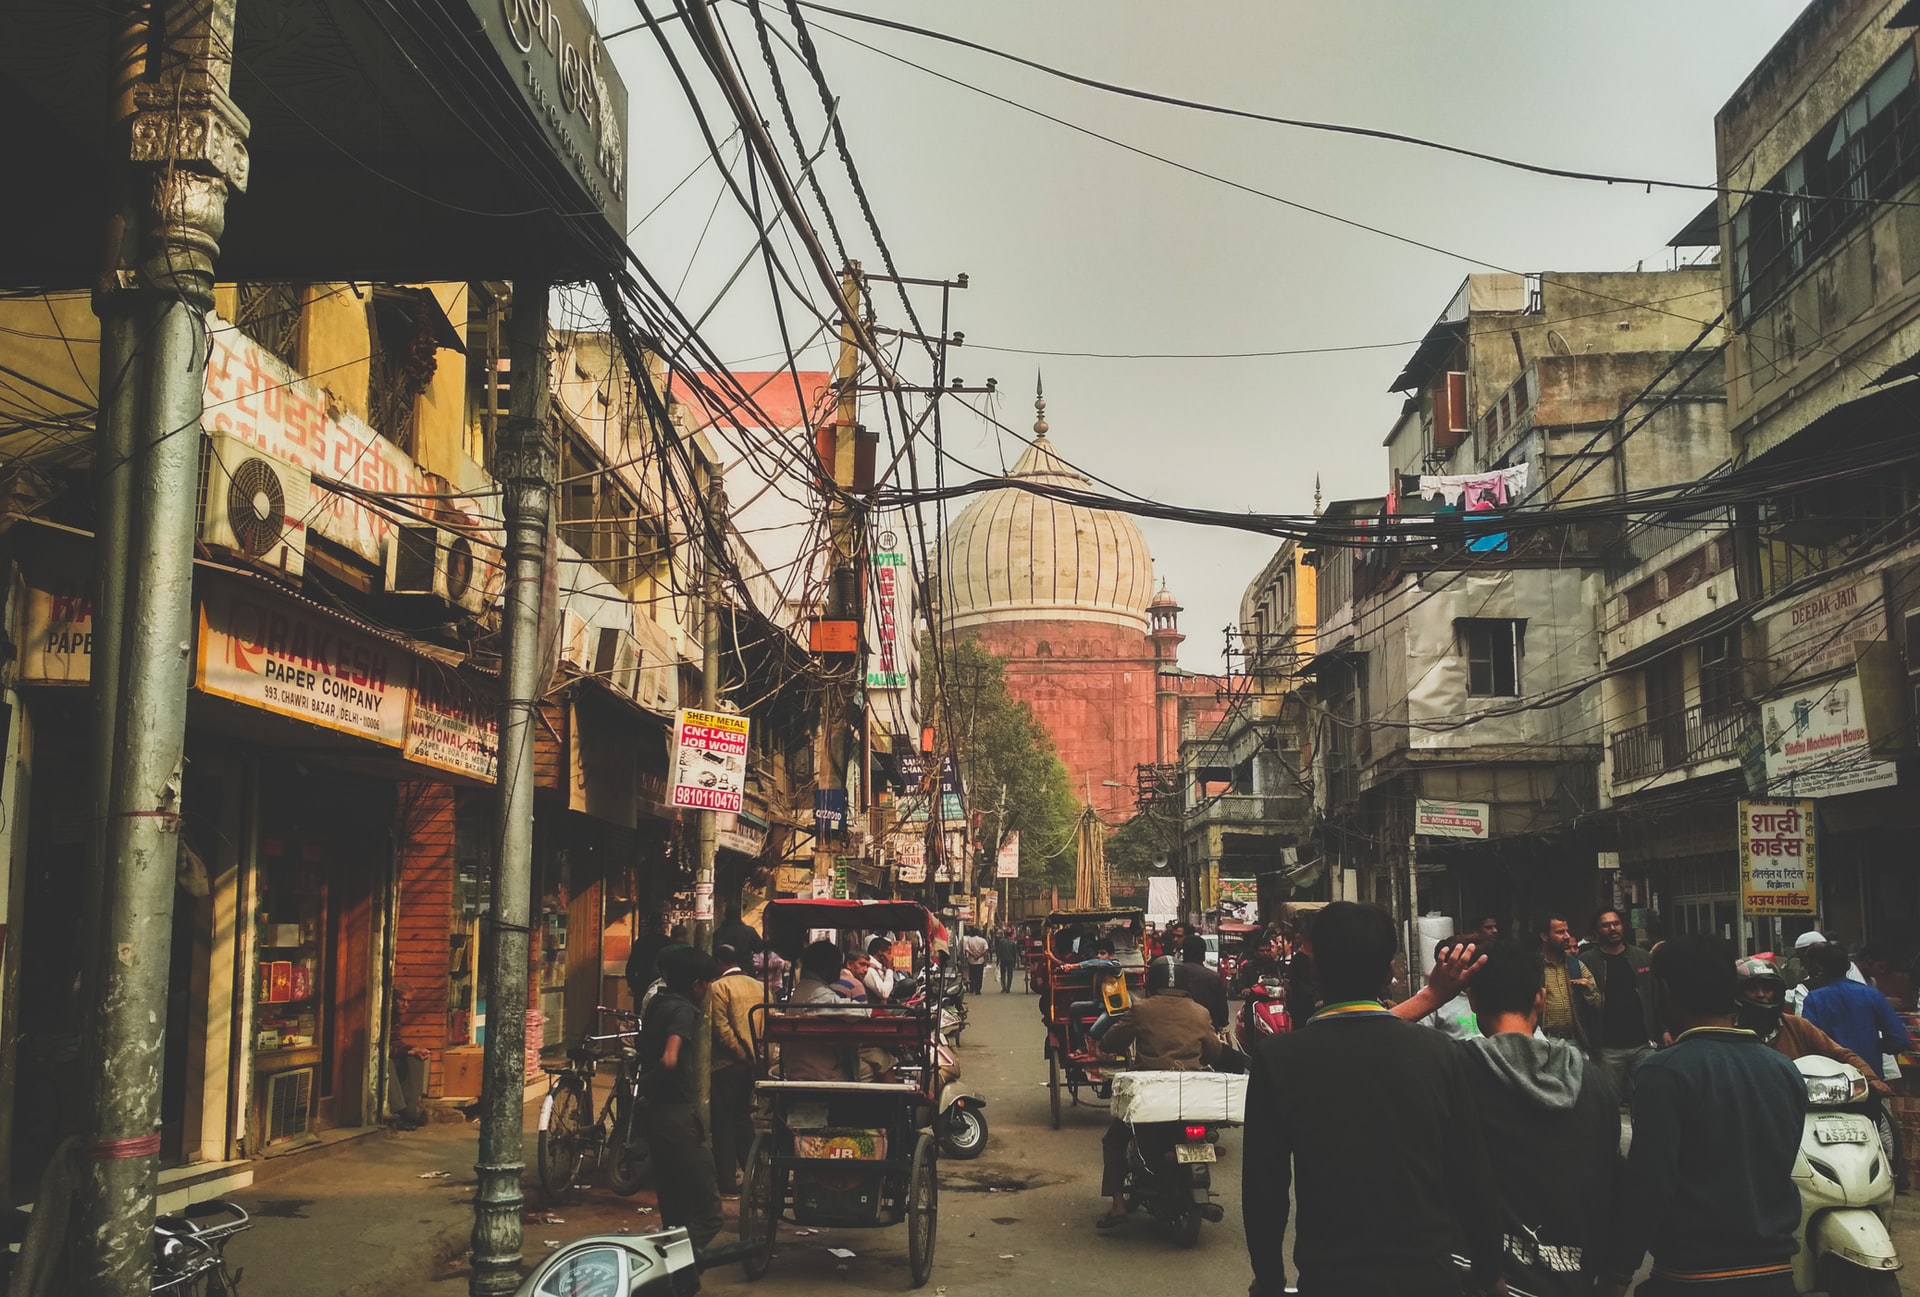 A street scene in Delhi, a city featured prominently in the Darmiyaan podcast.